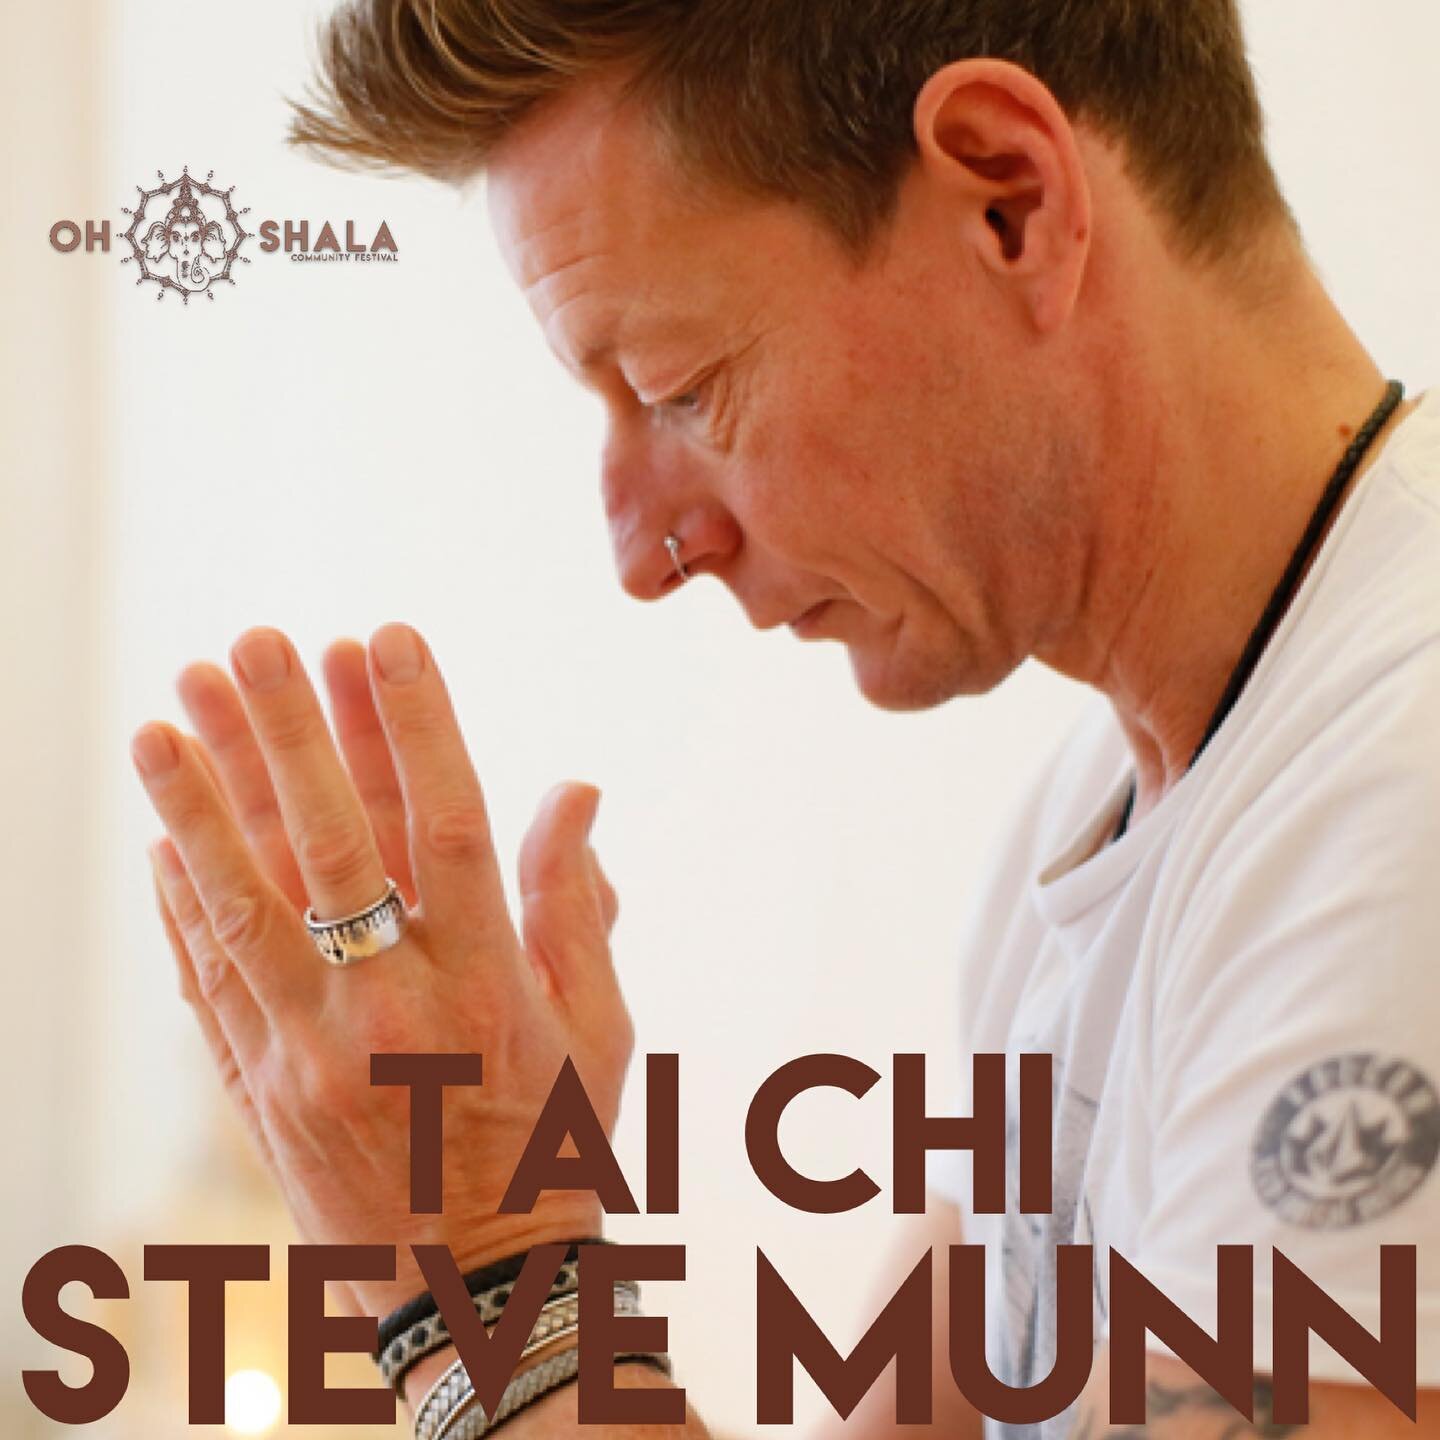 MEET STEVE
.
Steve @the_henley_yoga_studio will be teaching morning Tai Chi at the Ohshala Festival.

Steve trained in Qi Gong with Eva and Karel Koskuba and teaches Chen Style Tai Chi. Steve also teaches Yin yoga at his studio in Henley with Carlin,